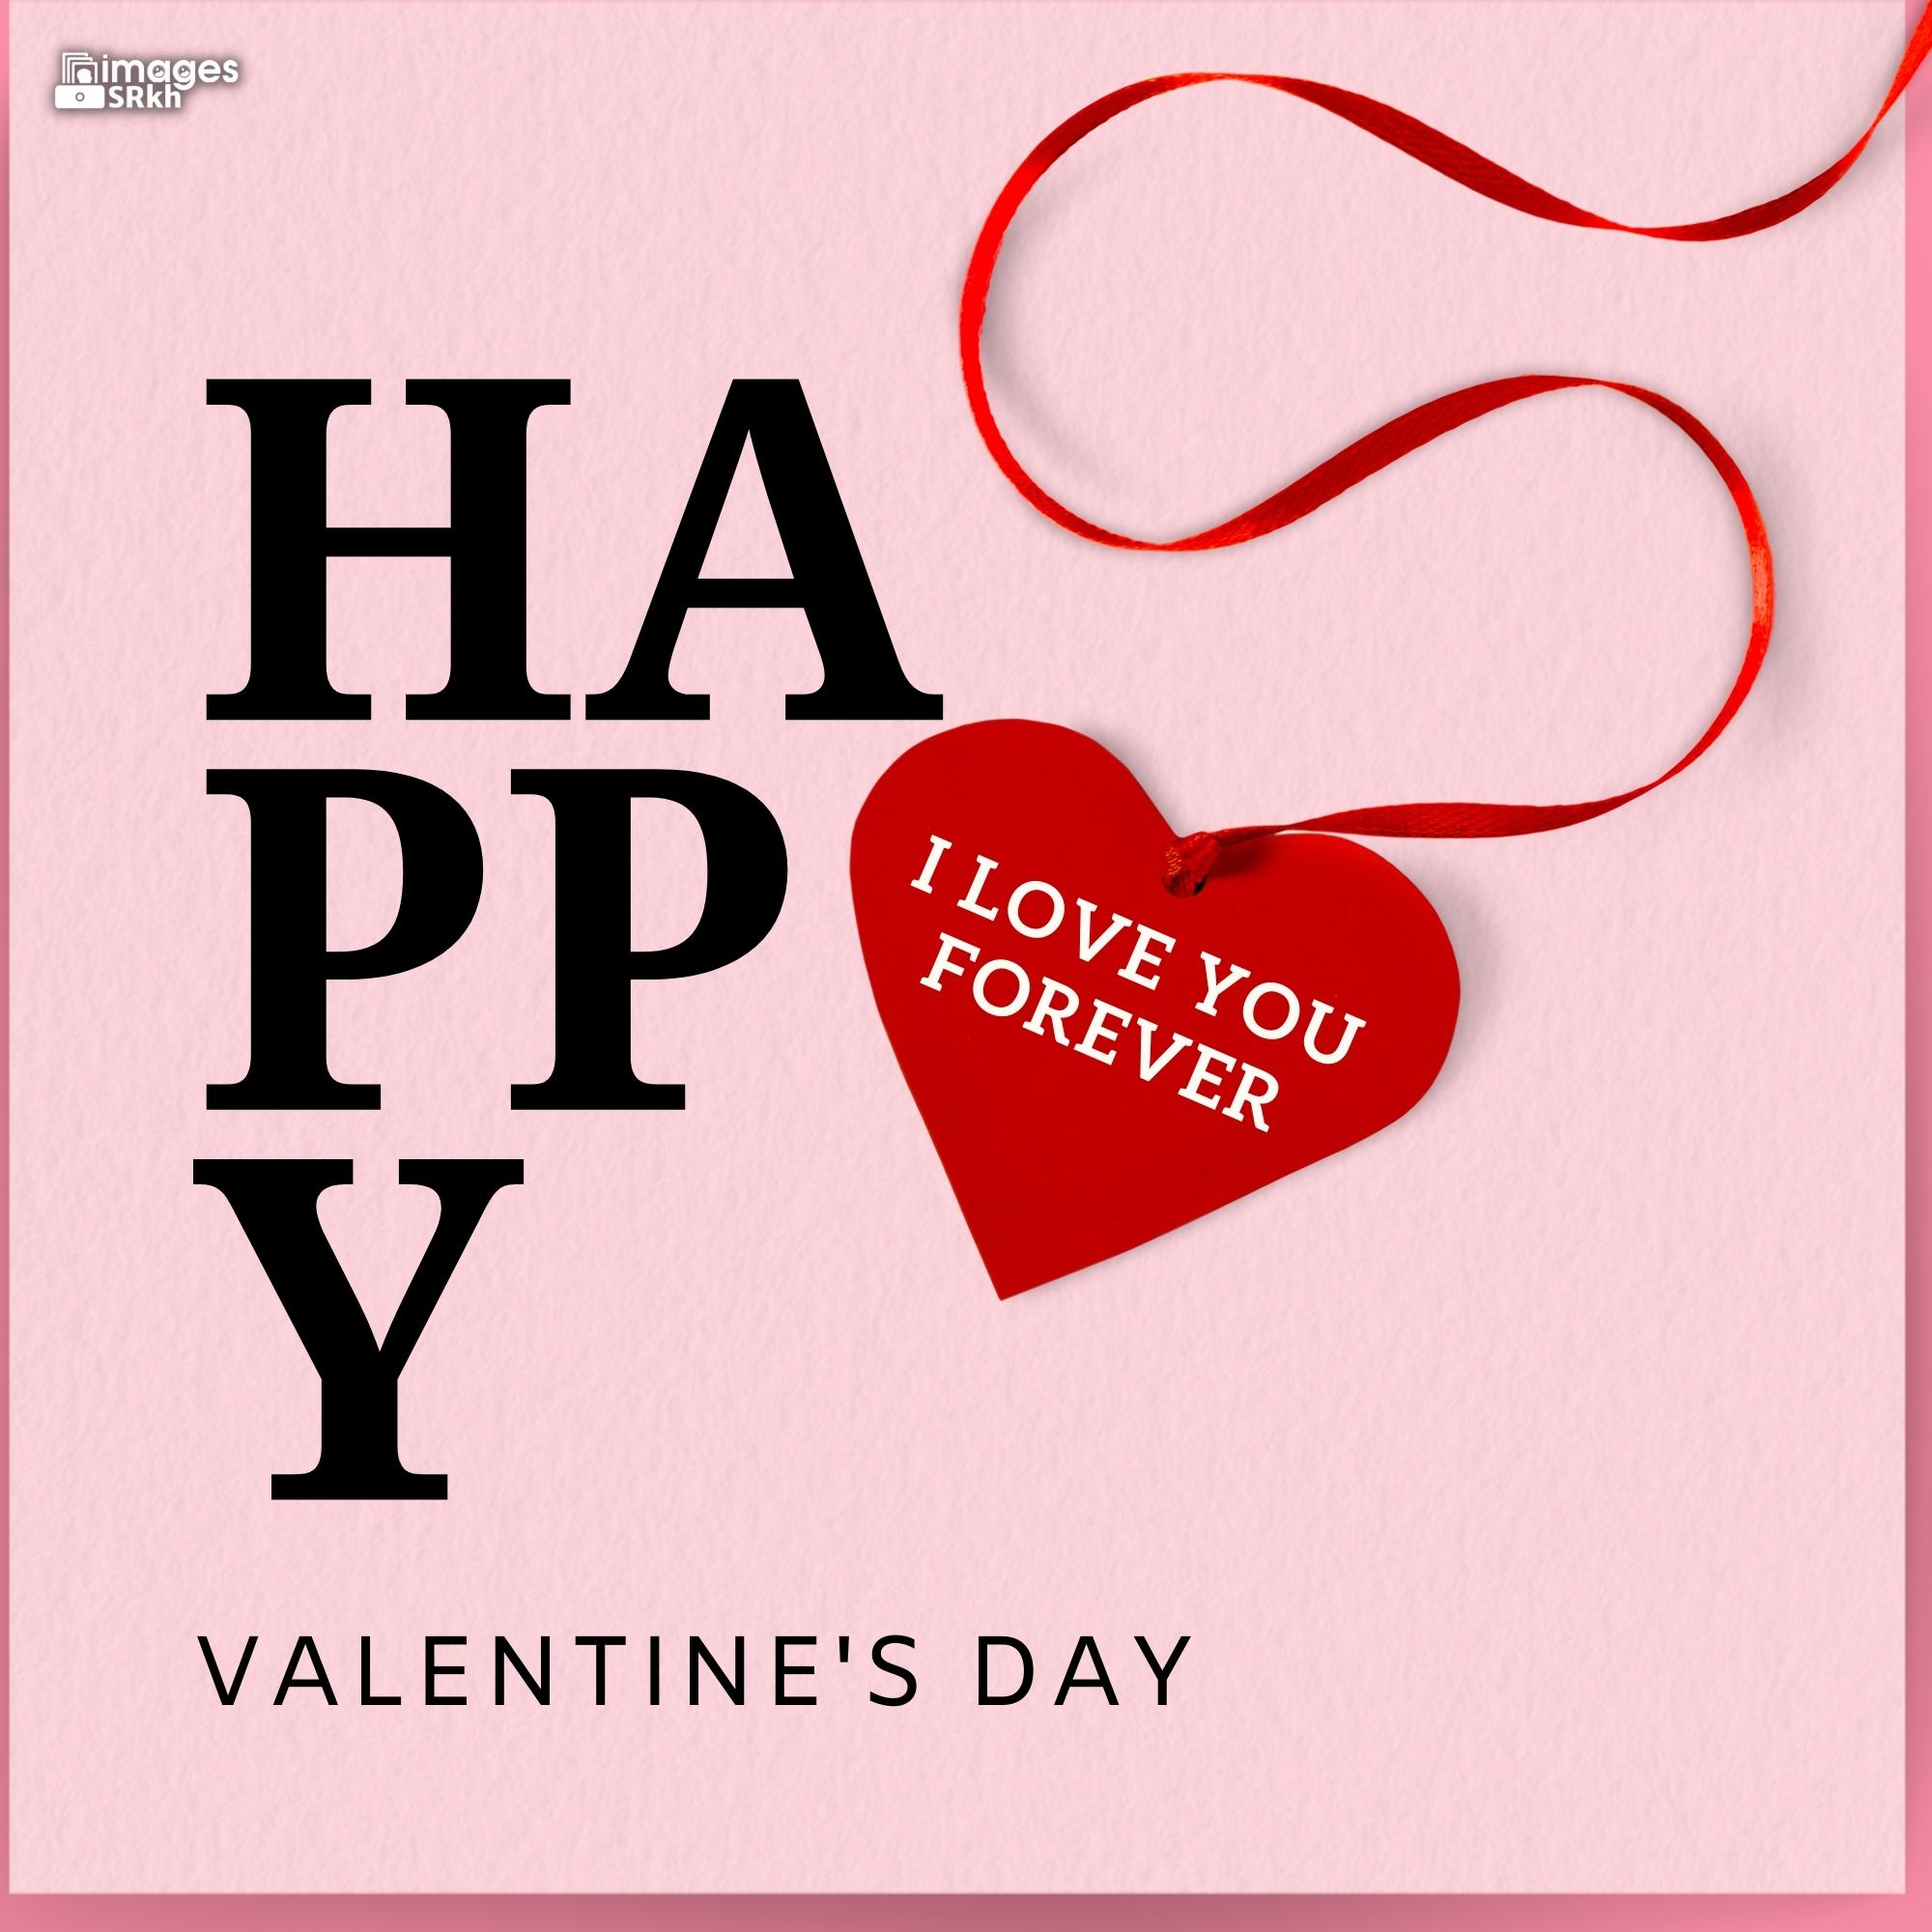 Happy Valentines Day | 441 | PREMIUM IMAGES | Wishes for Love